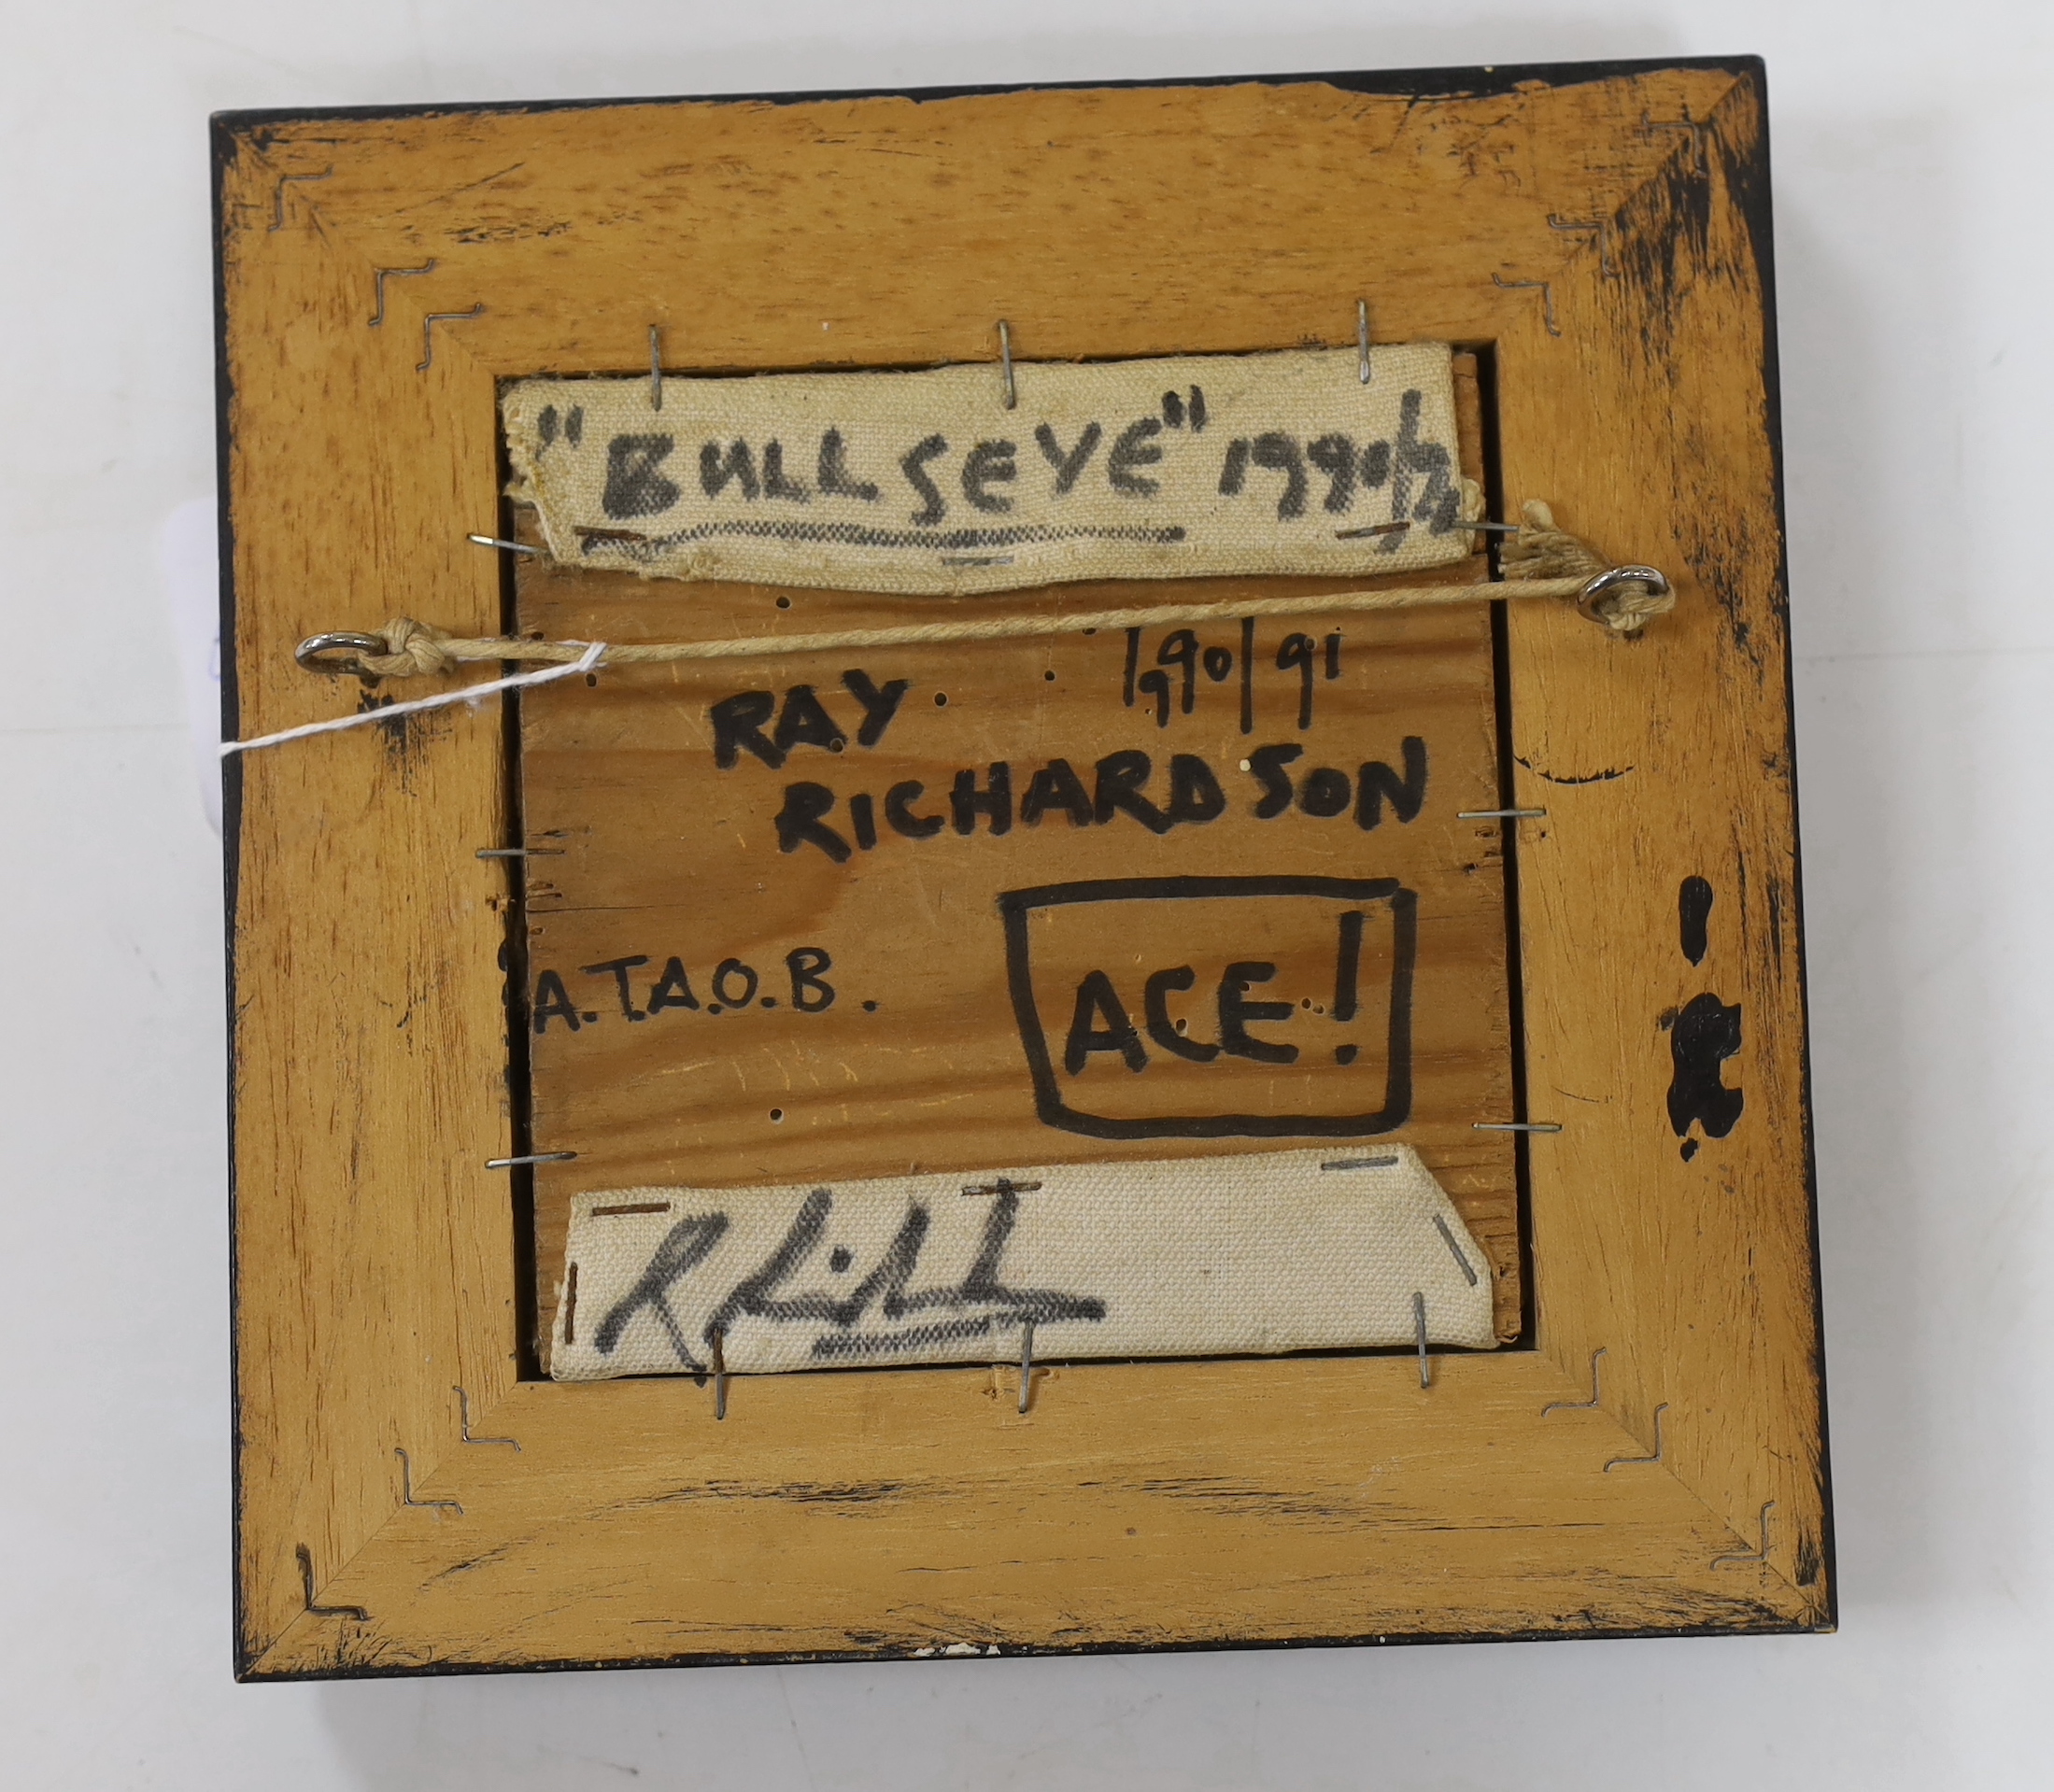 Ray Richardson (b.1964), contemporary oil on canvas, laid on board, ‘Bullseye’, inscribed verso, 10.5 x 10.5cm, (Evidence of woodworm)